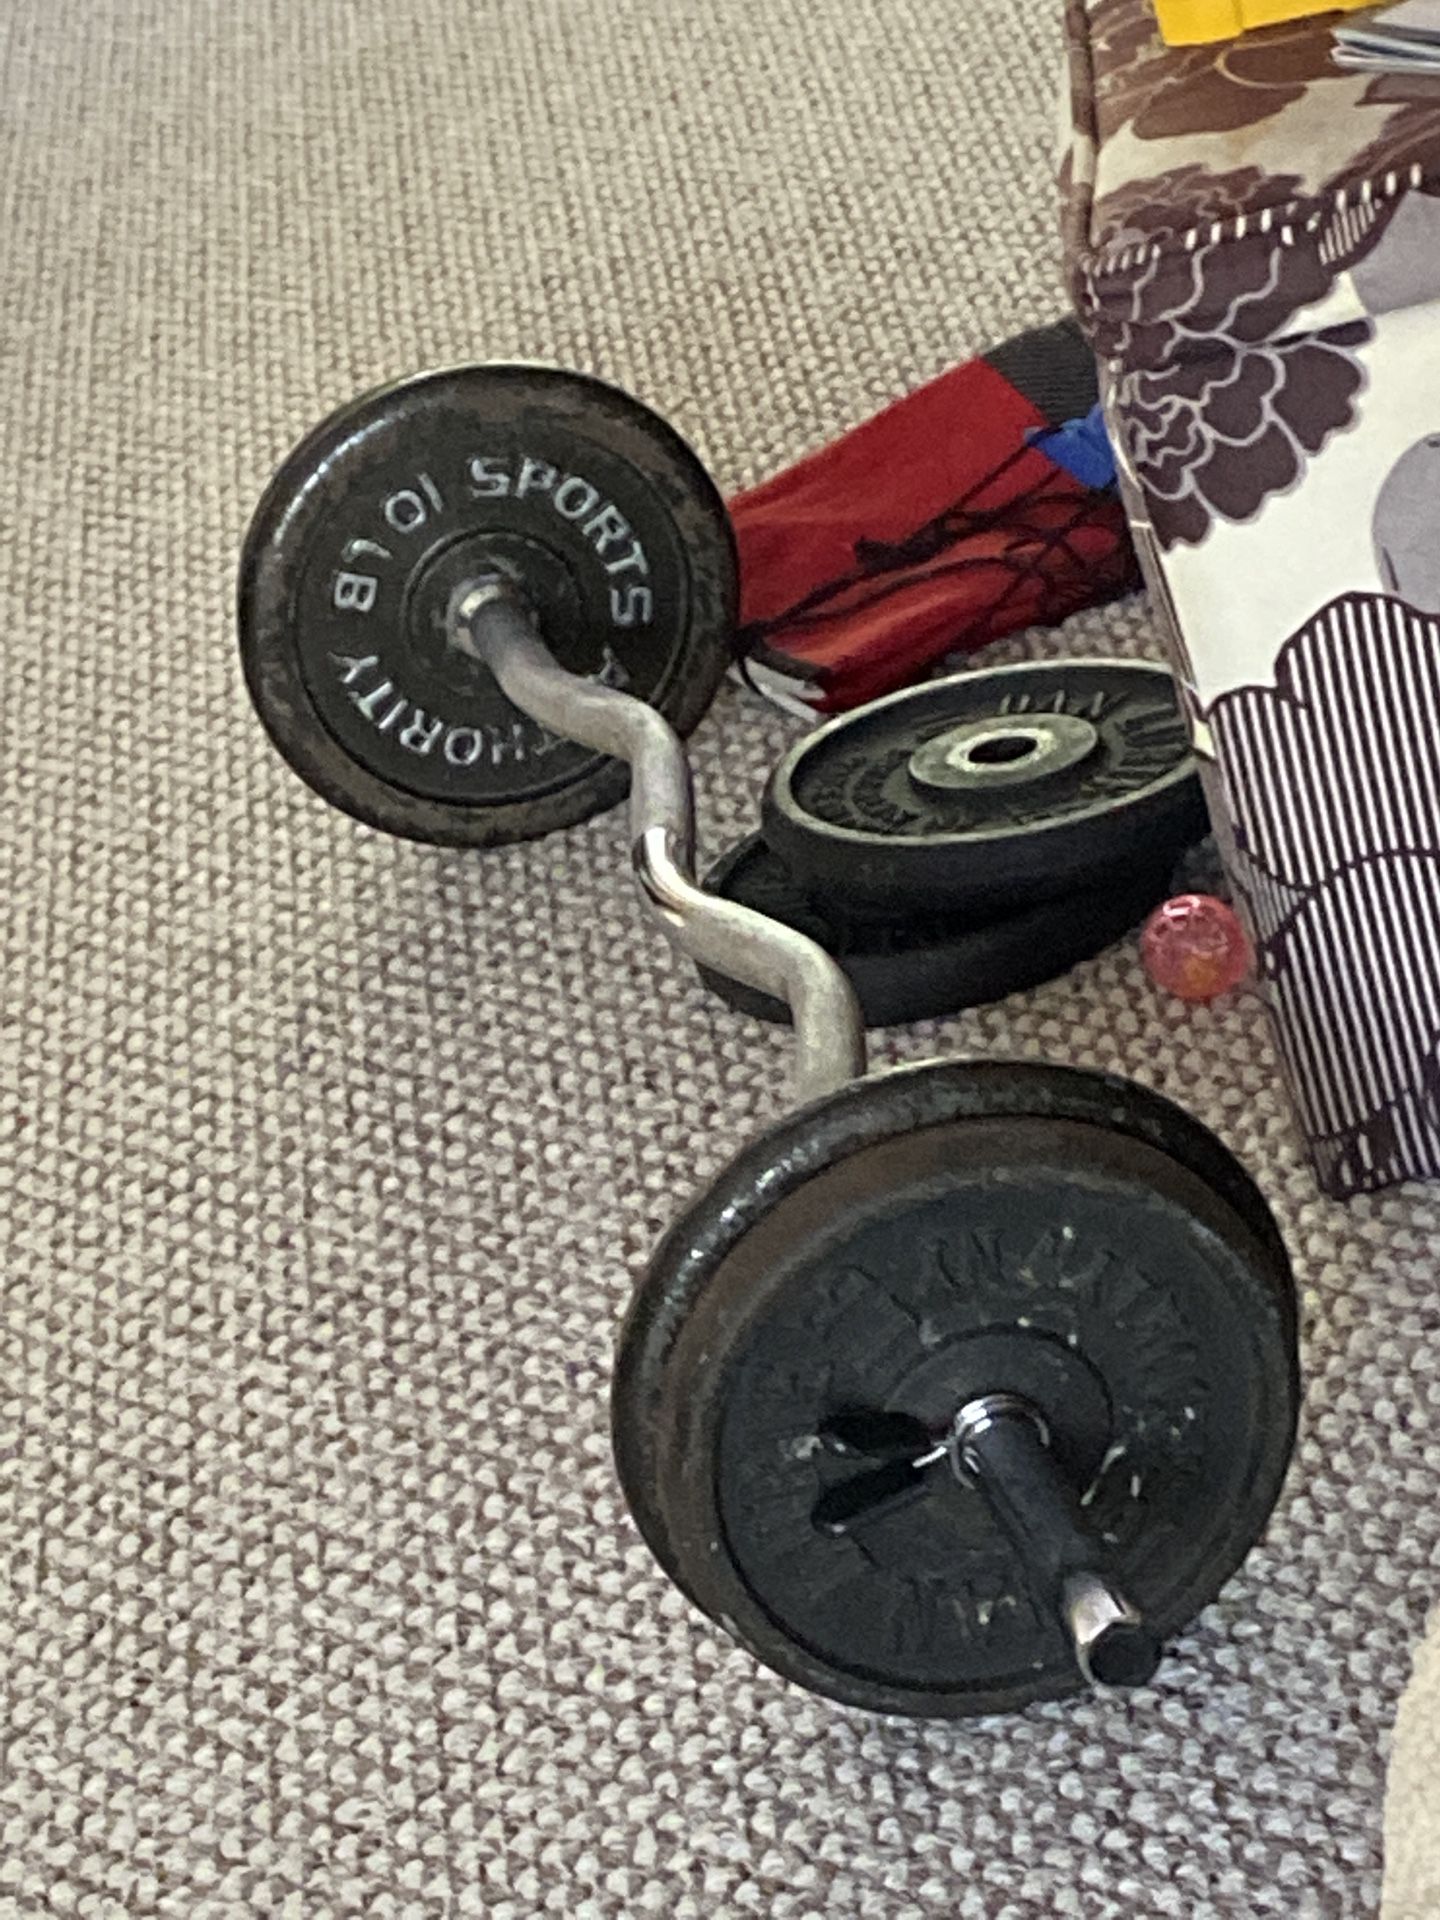 Curl bar with 80lbs of plates